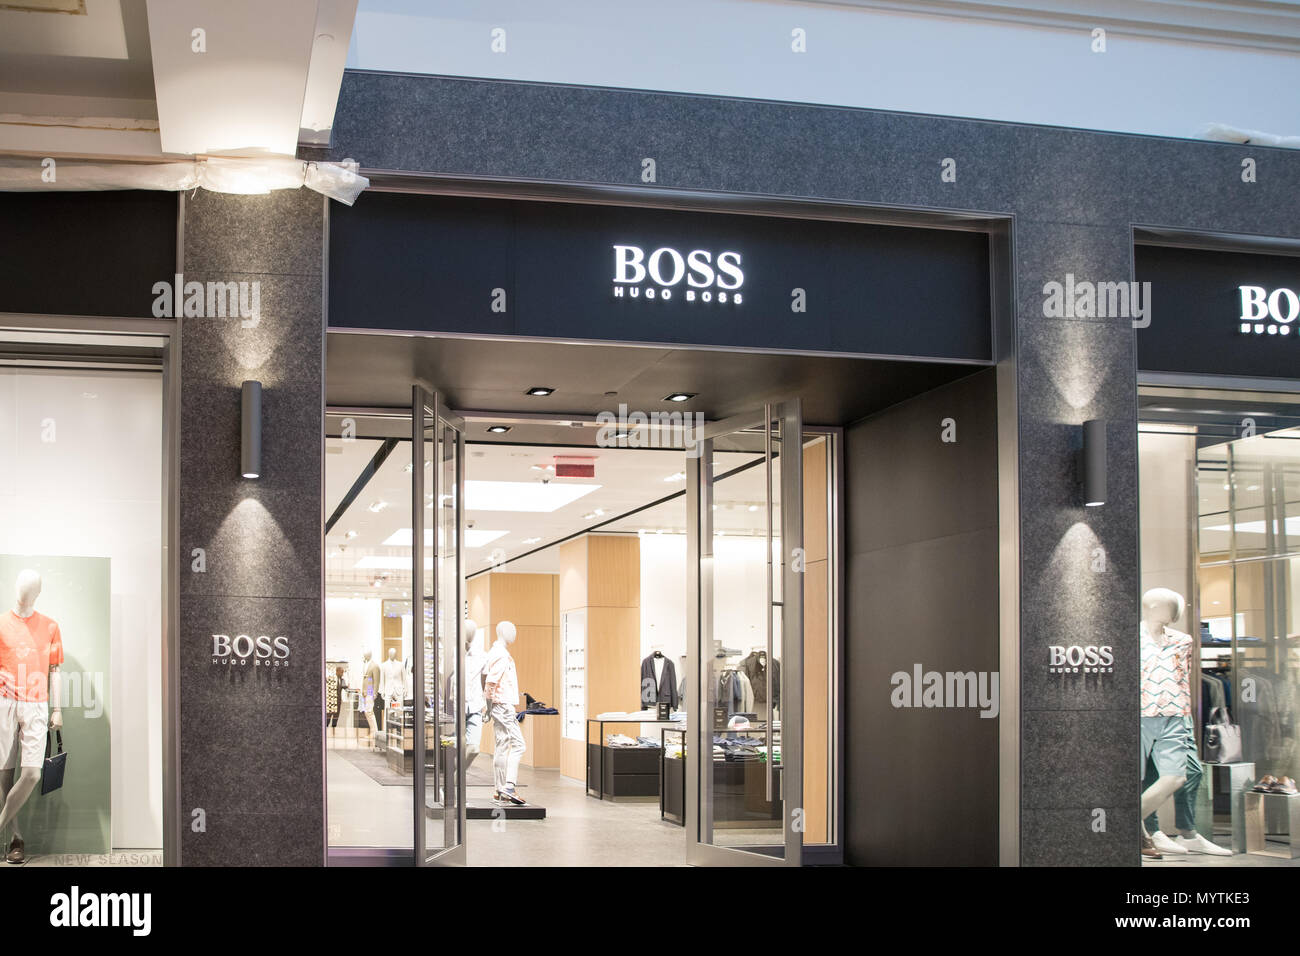 Moda mall hi-res stock photography and images - Alamy